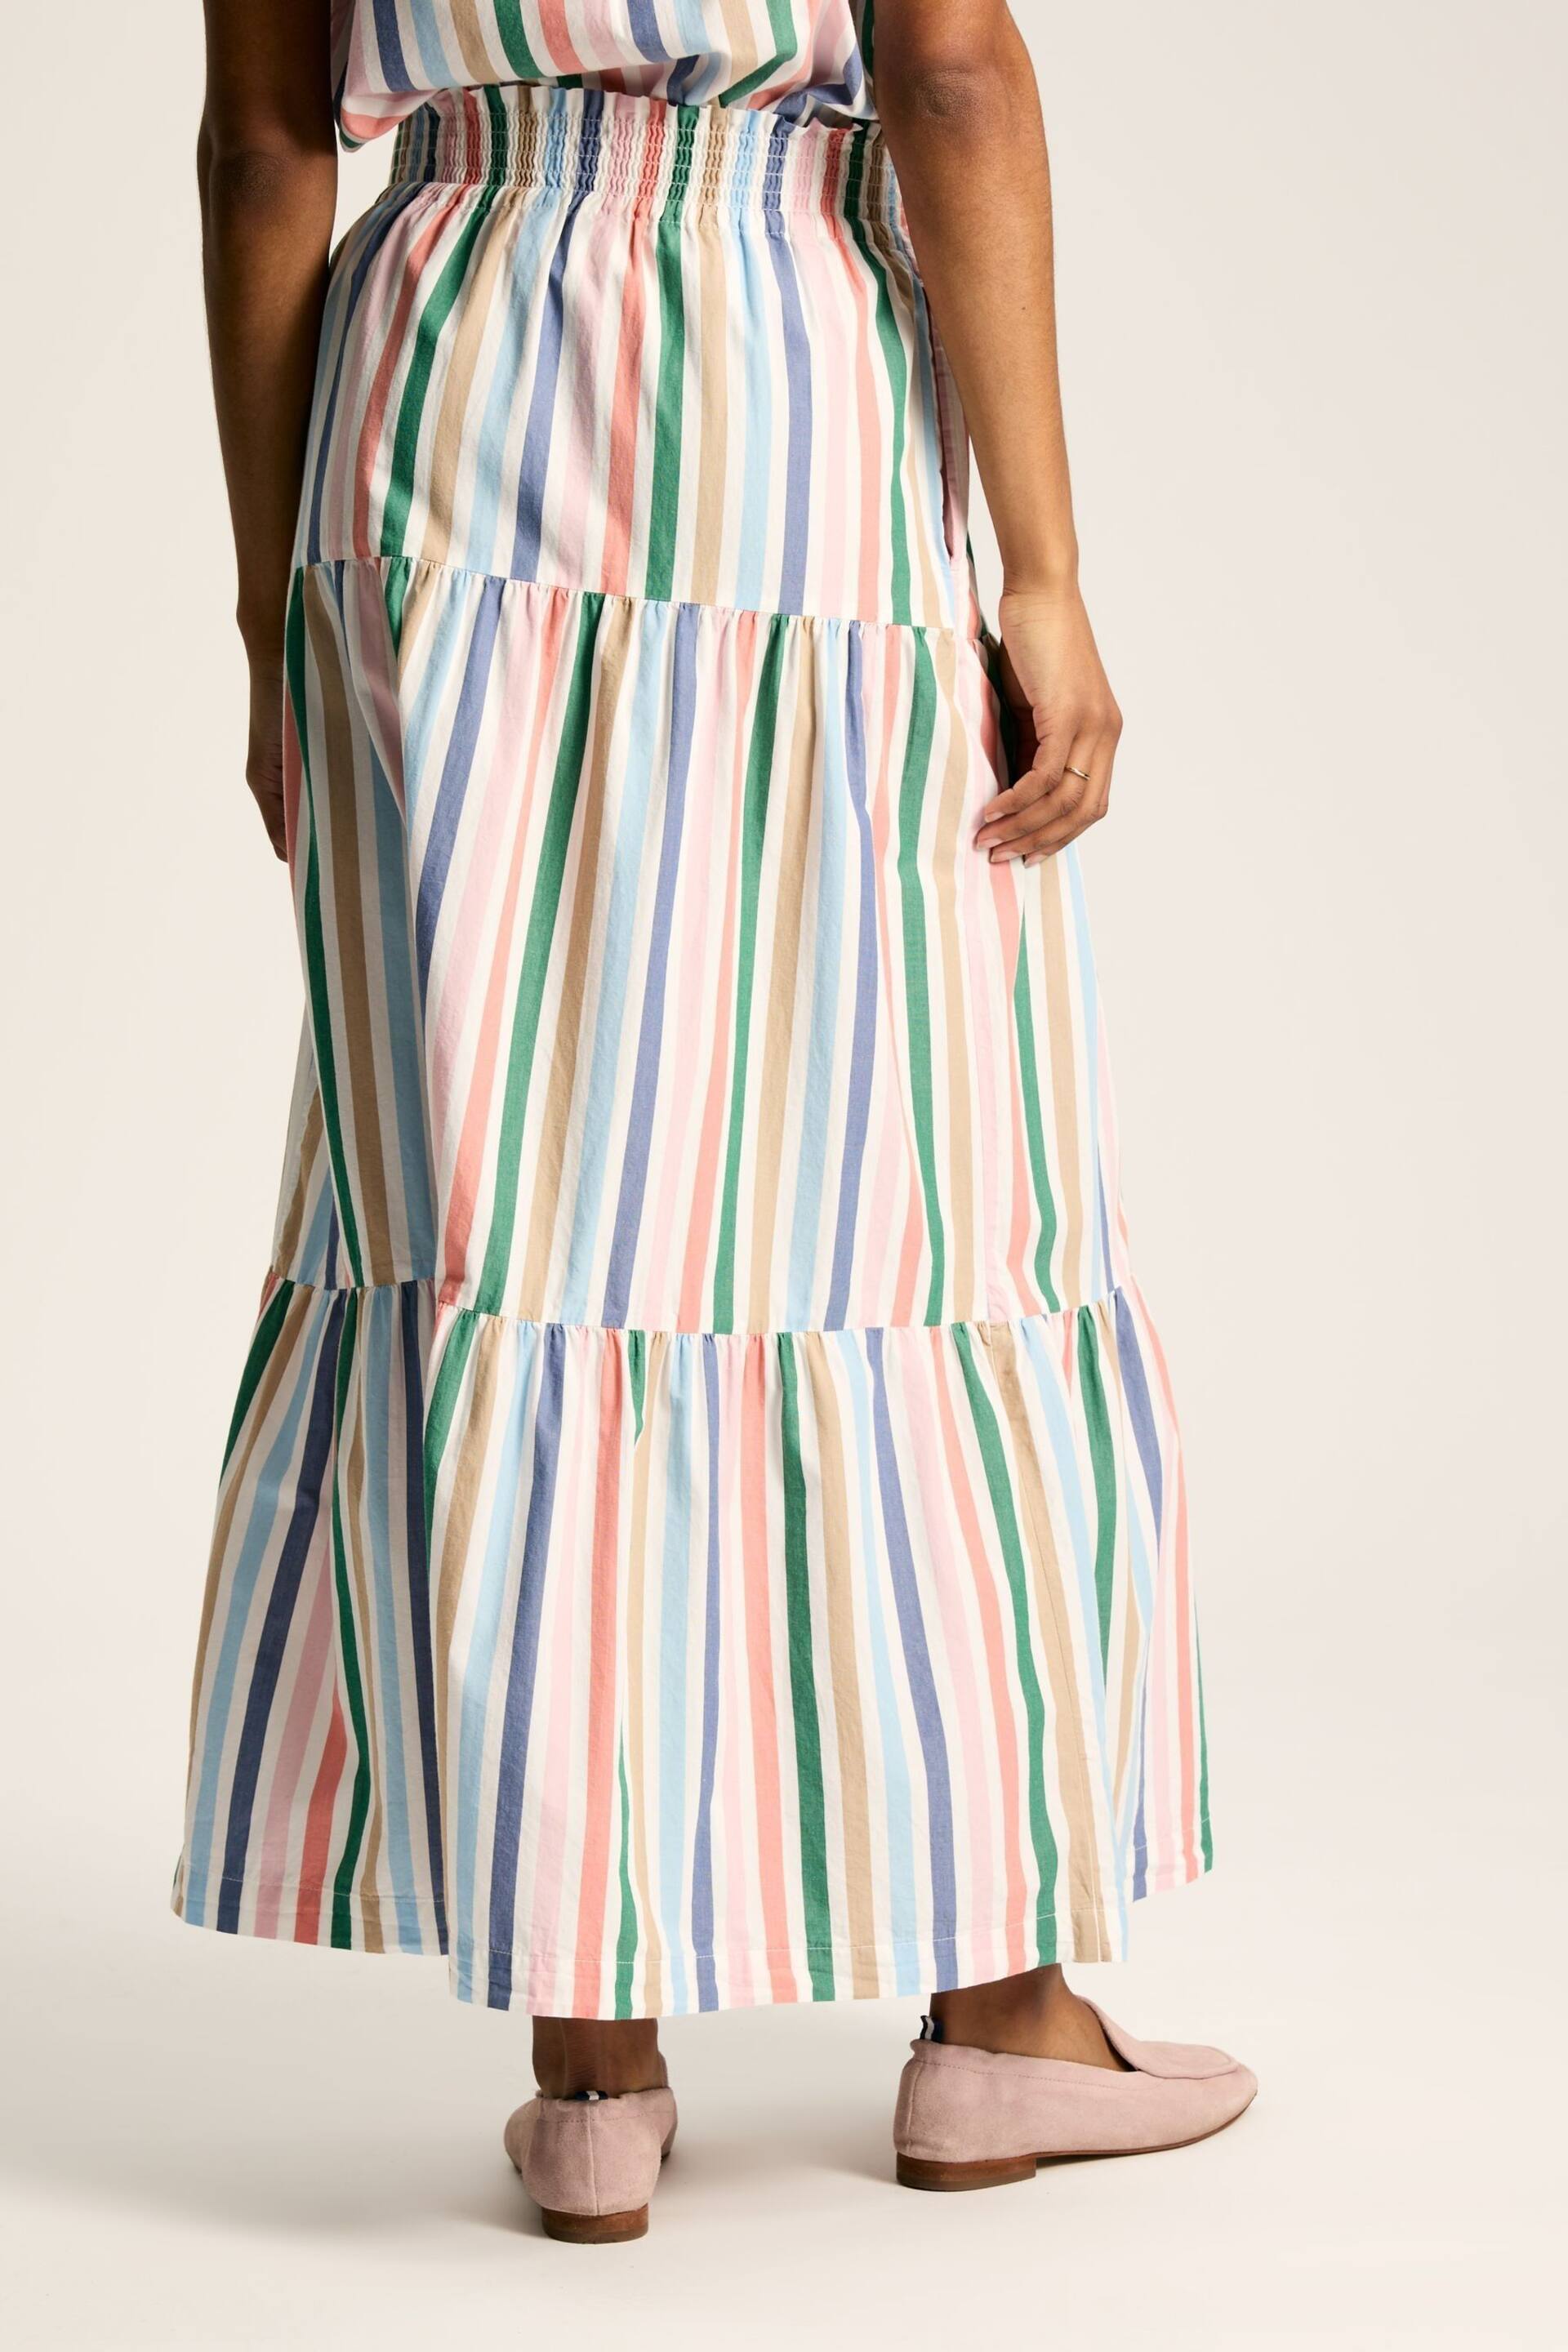 Joules Cynthia Stripe Tiered Co-ord Skirt - Image 2 of 8